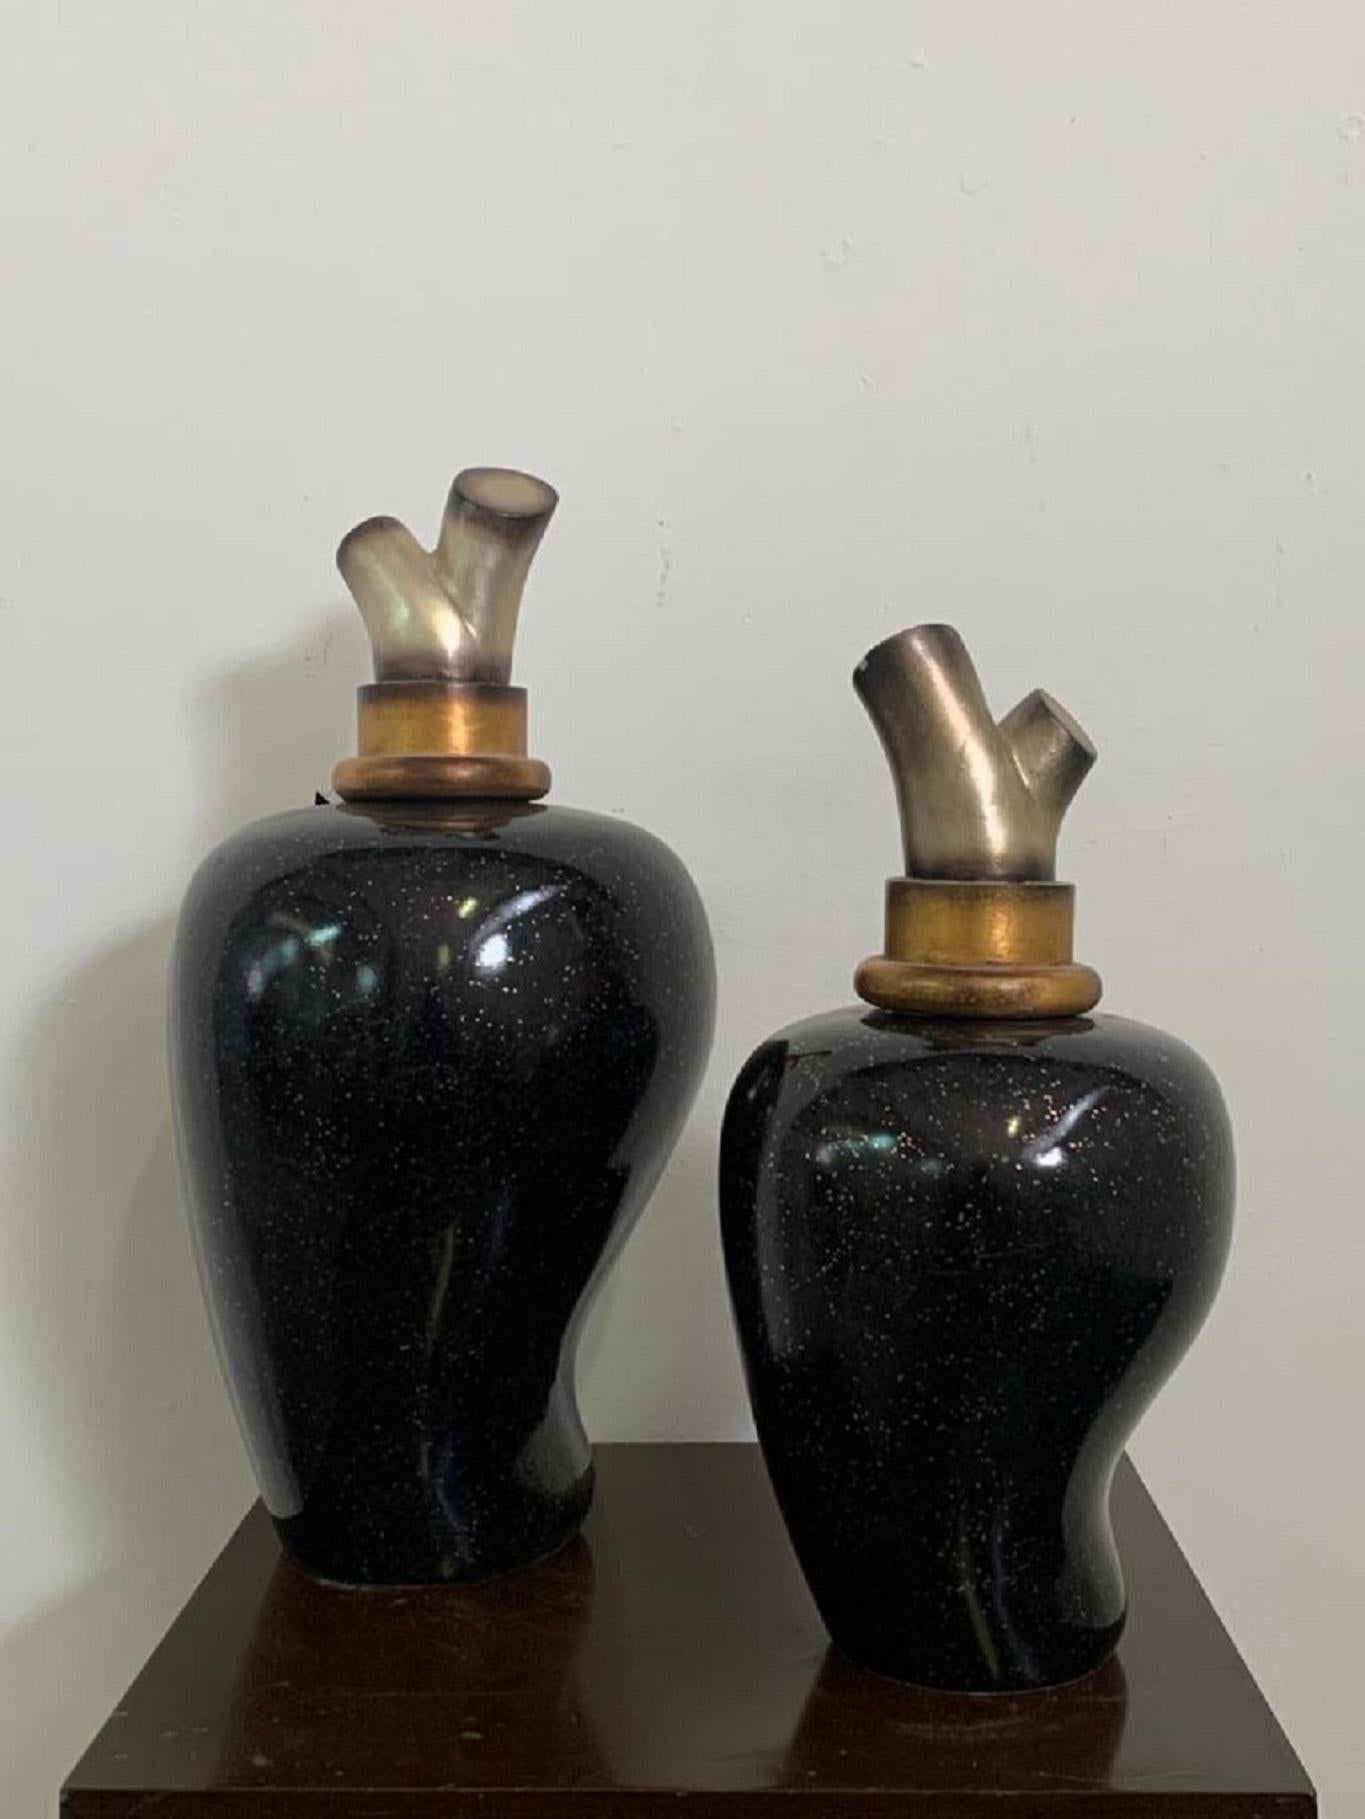 Vases with silver and gold lid internally decorated in black dotted gold. Large: h 57 x diameter 26 cm. Small: h 47 x diameter 22 cm. 
Packaging with bubble wrap and cardboard boxes is included. If the wooden packaging is needed (fumigated crates or